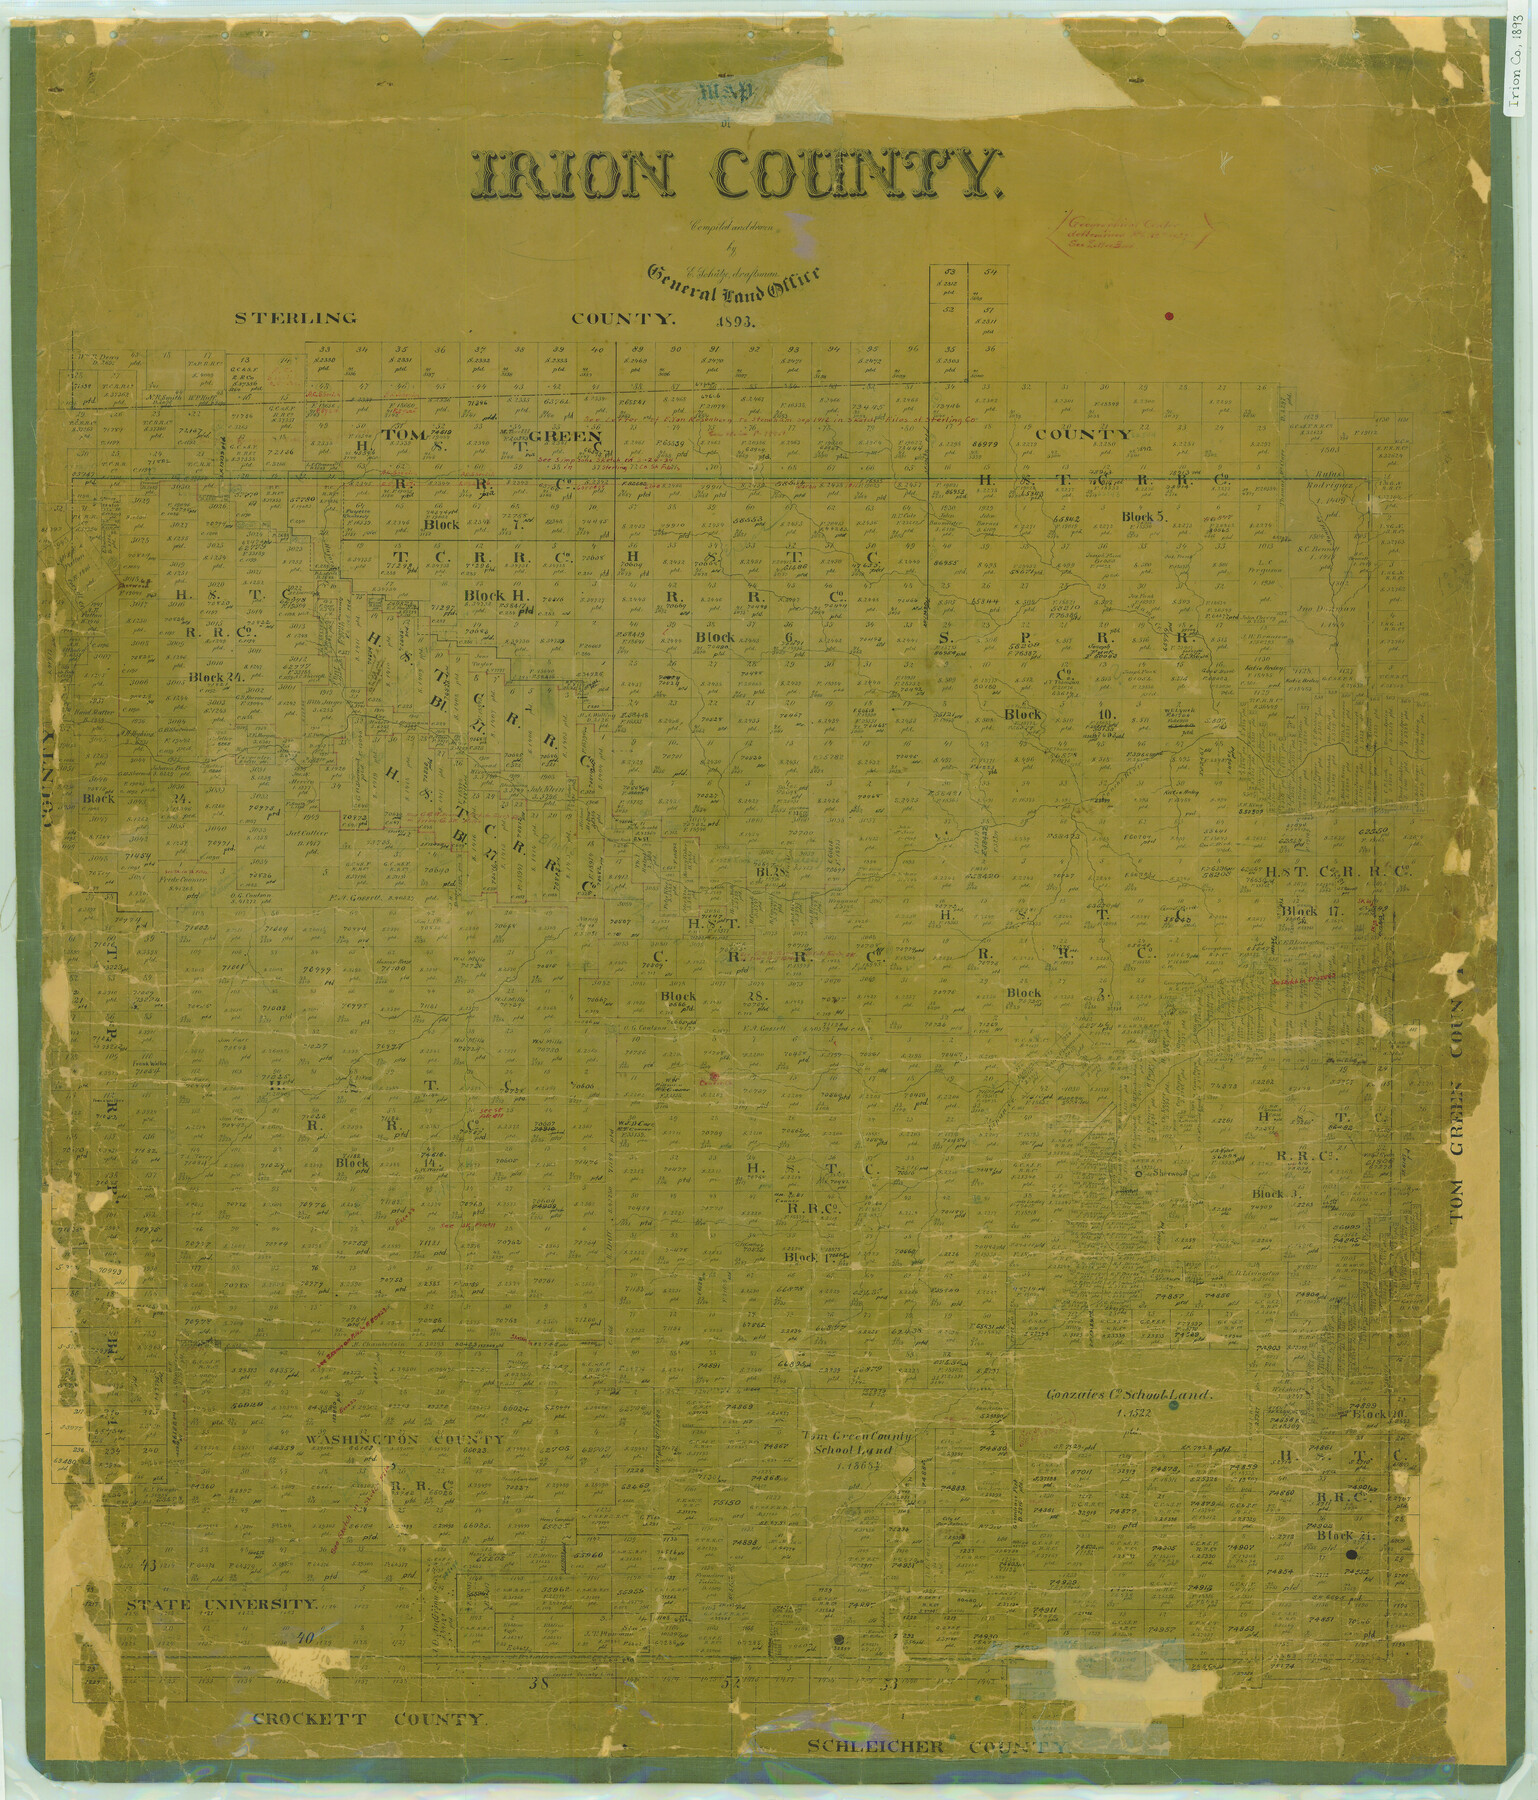 16857, Map of Irion County, General Map Collection